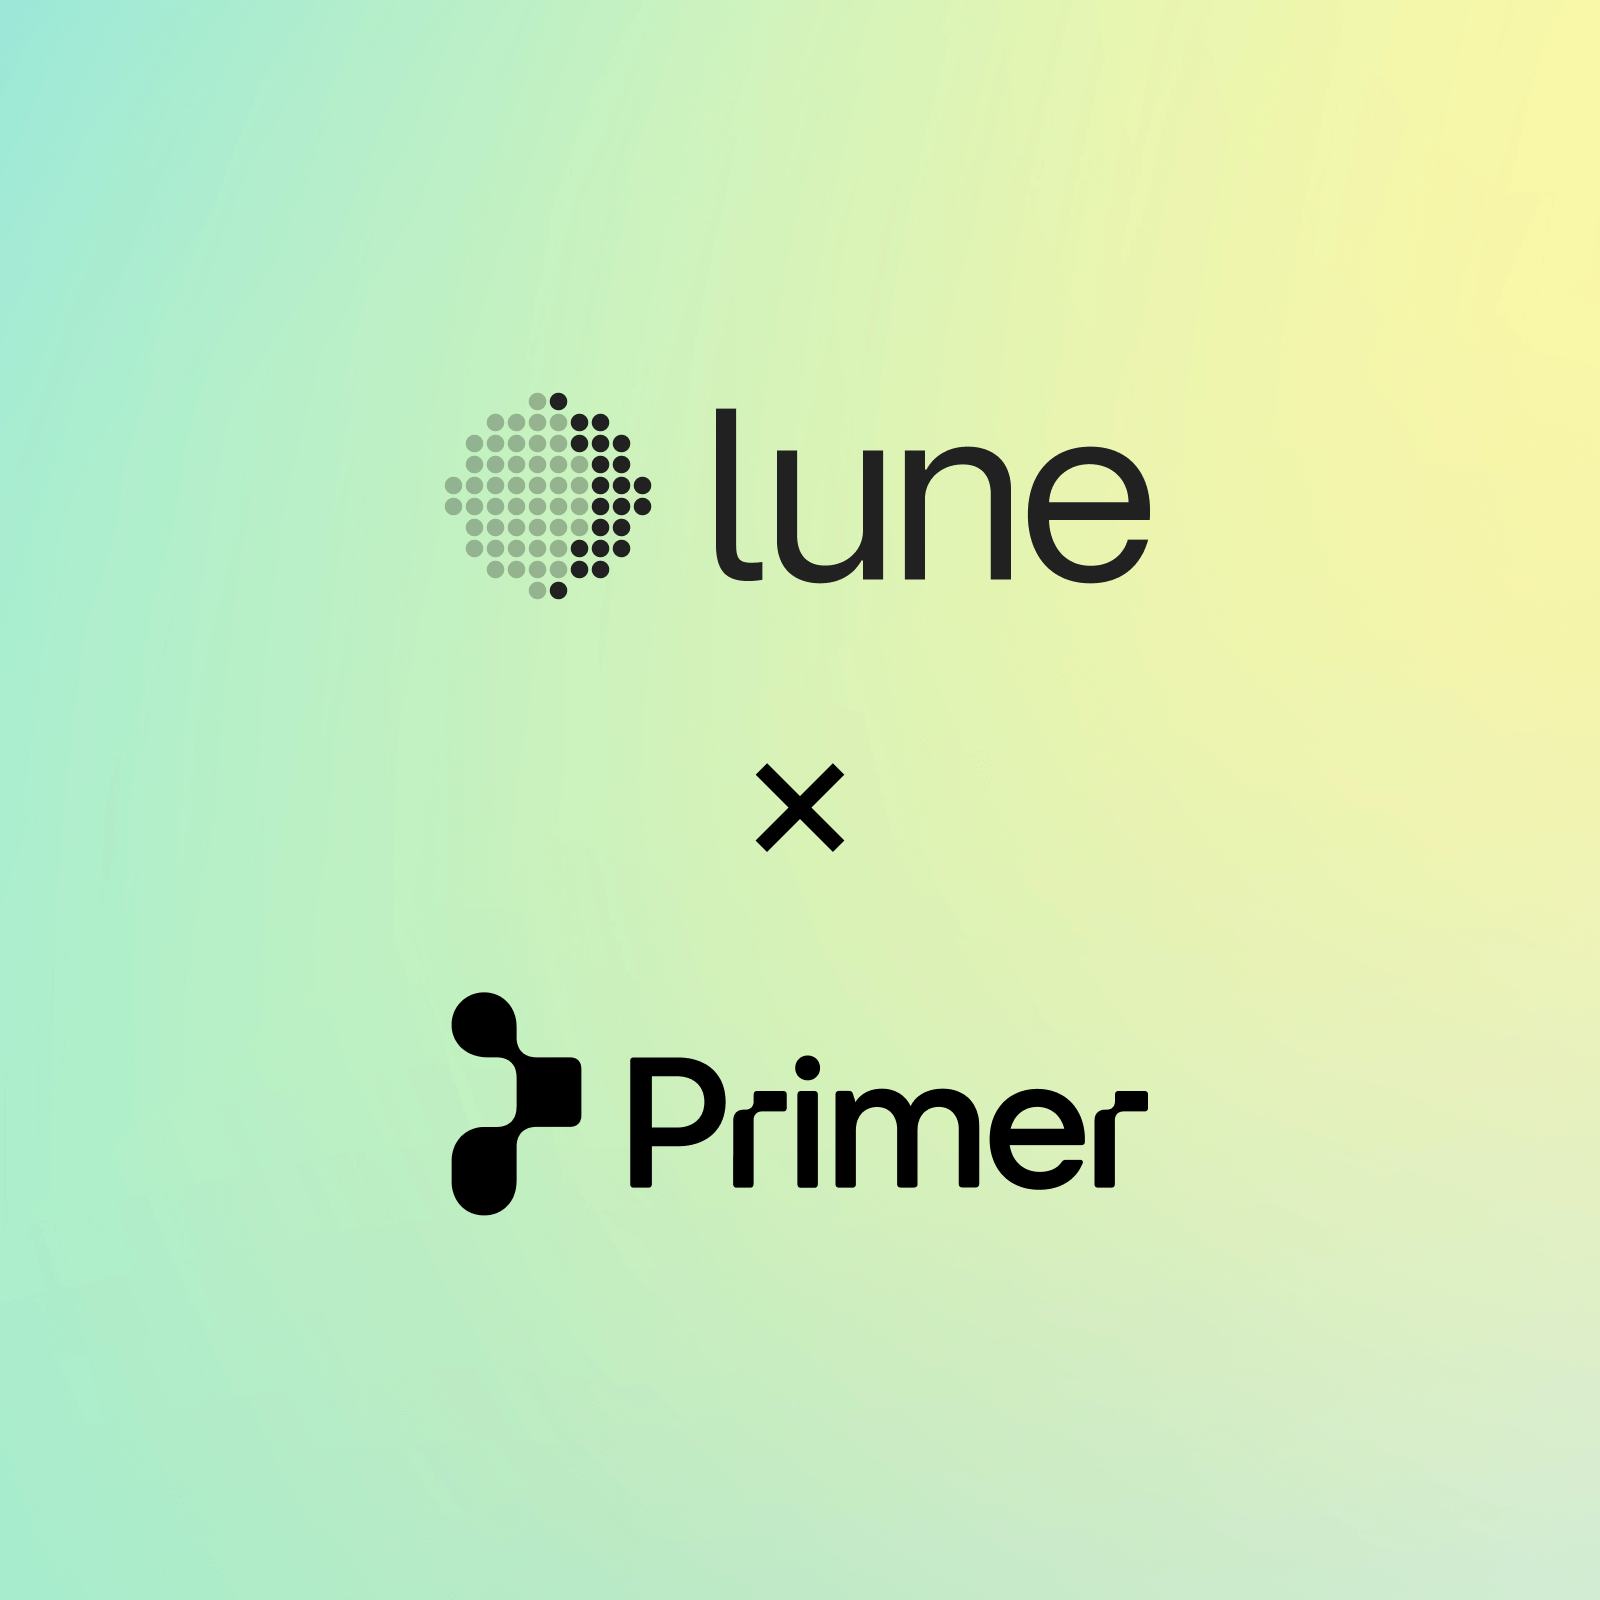 Primer partners with Lune to add climate impact into the payments and commerce flow